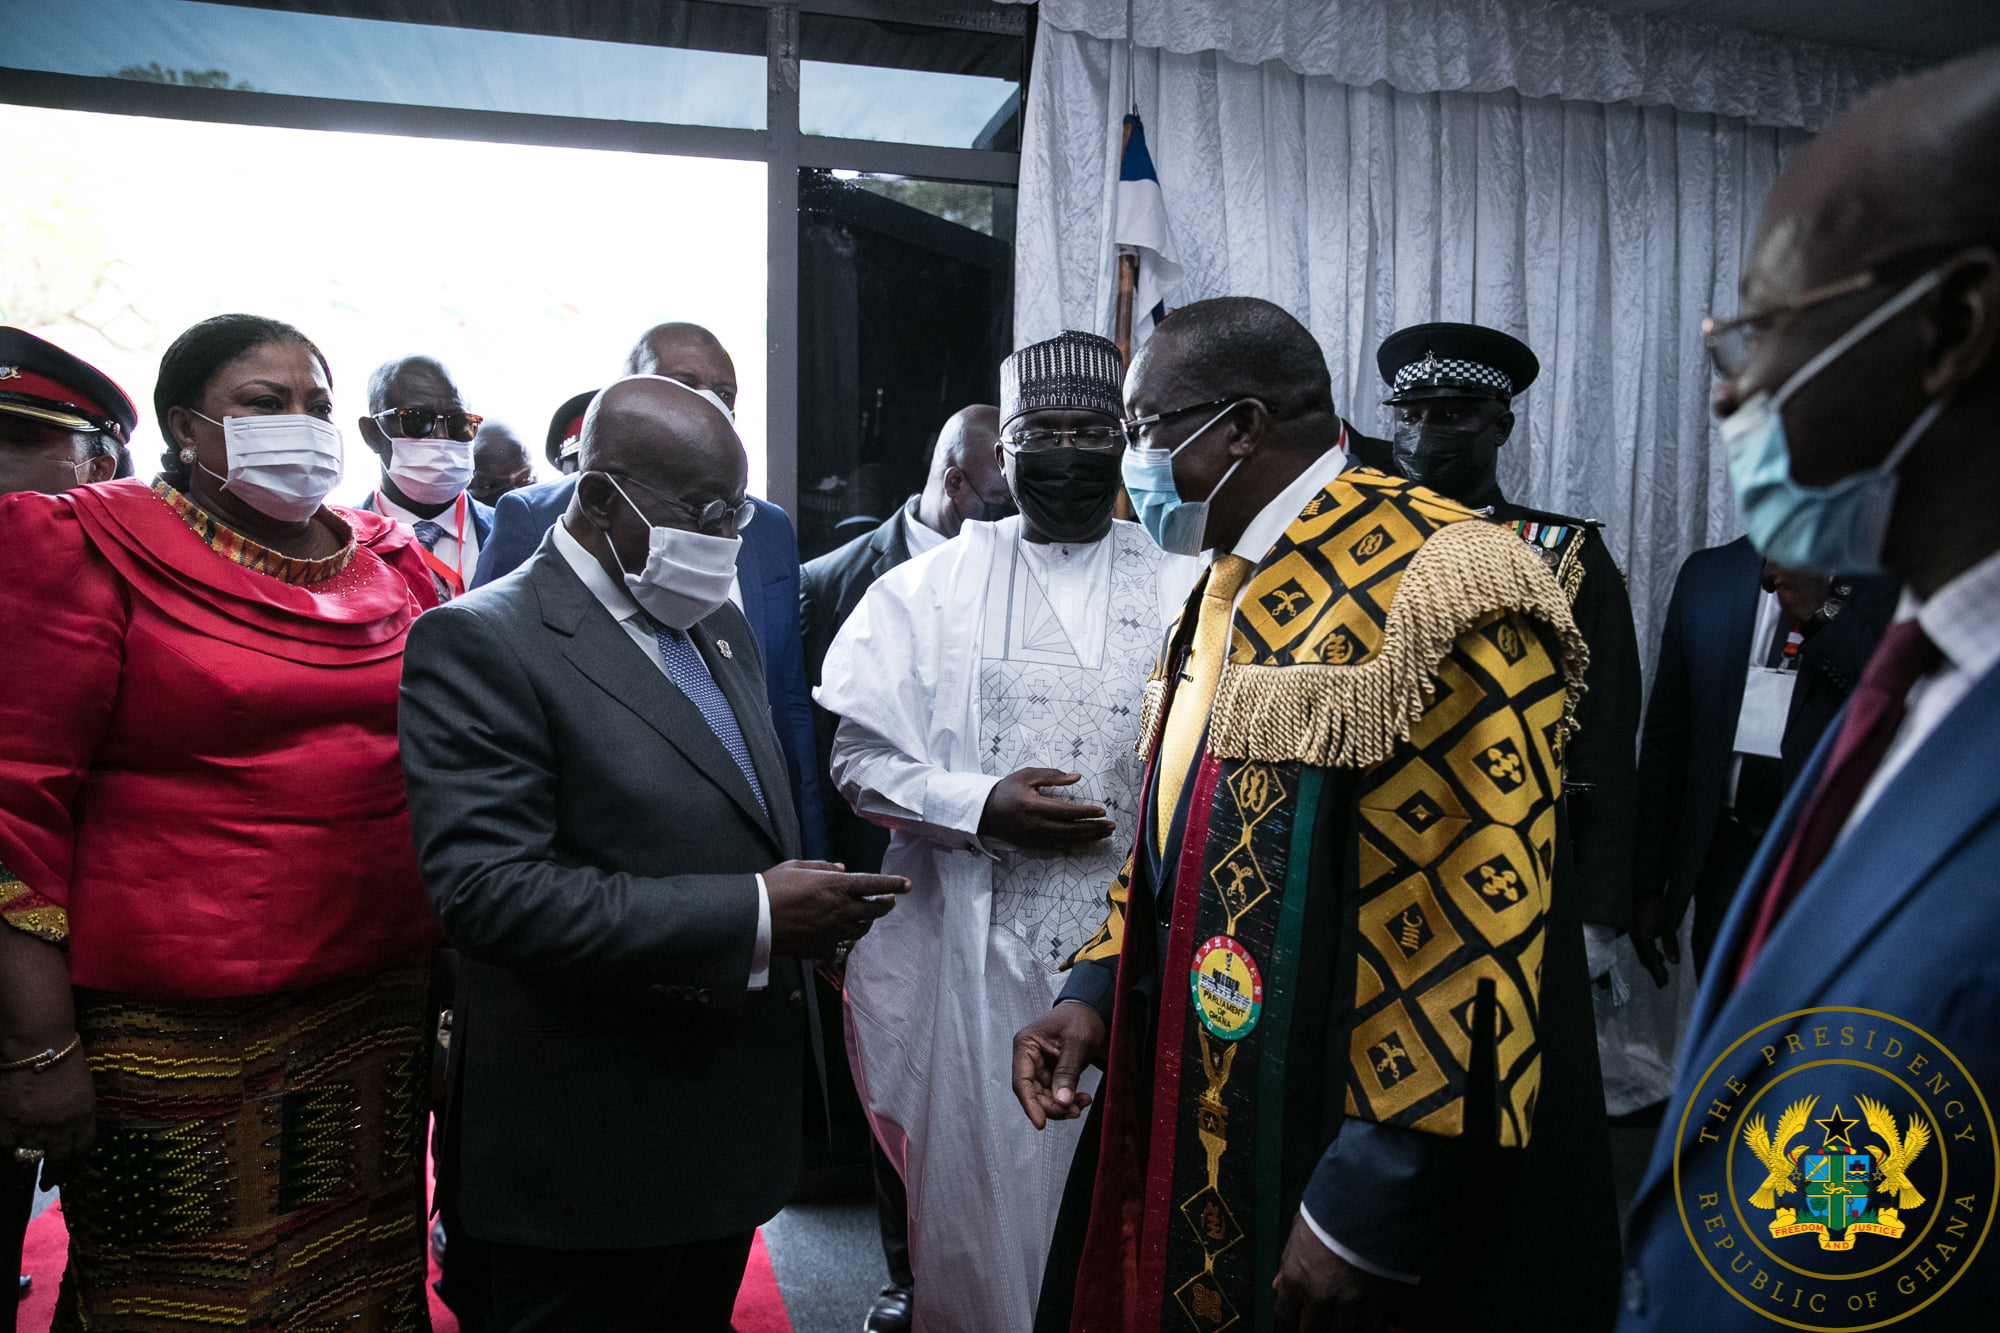 President Akufo-Addo (left) interacting with Mr. Alban Sumana Bagbin (right) at the SONA 2021 in Accra. Those with them include Mr. Osei Kyei-Mensah-Bonsu (2nd right), the Majority Leader, and Mr. Haruna Iddrissu (3rd right), the Minority Leader